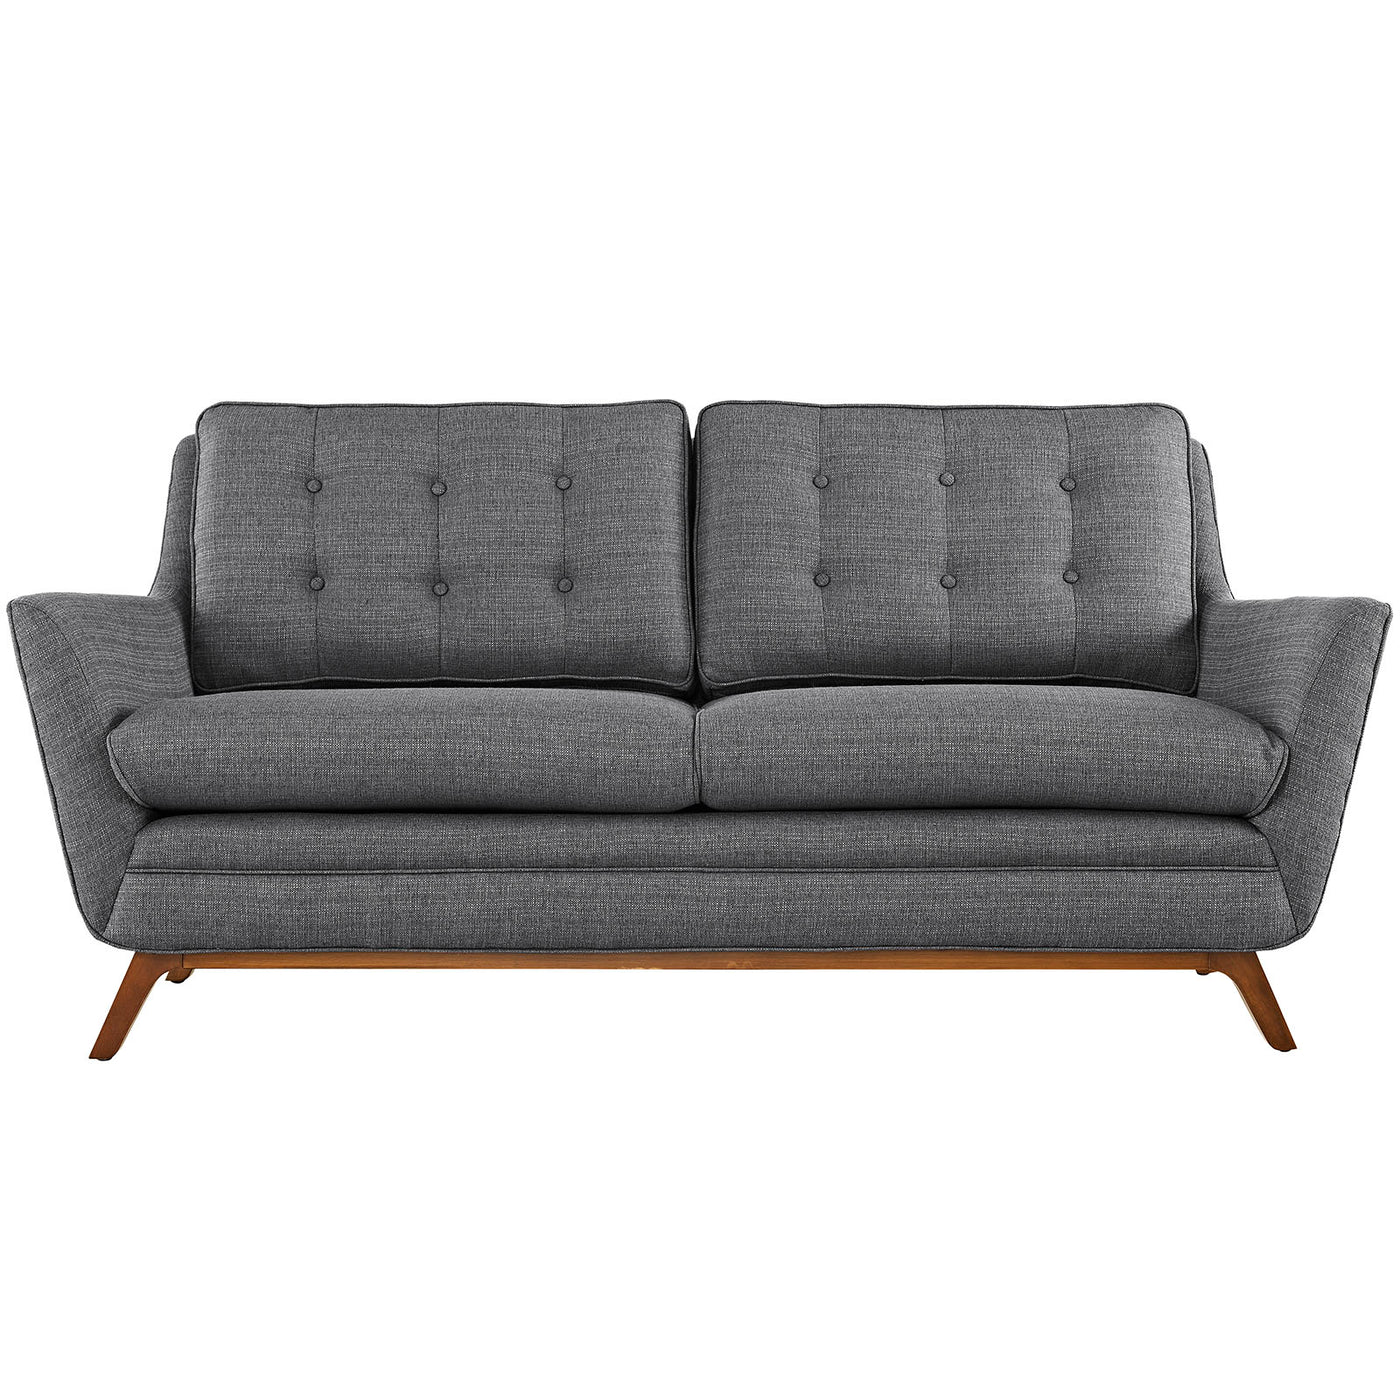 Beguile Upholstered Fabric Loveseat